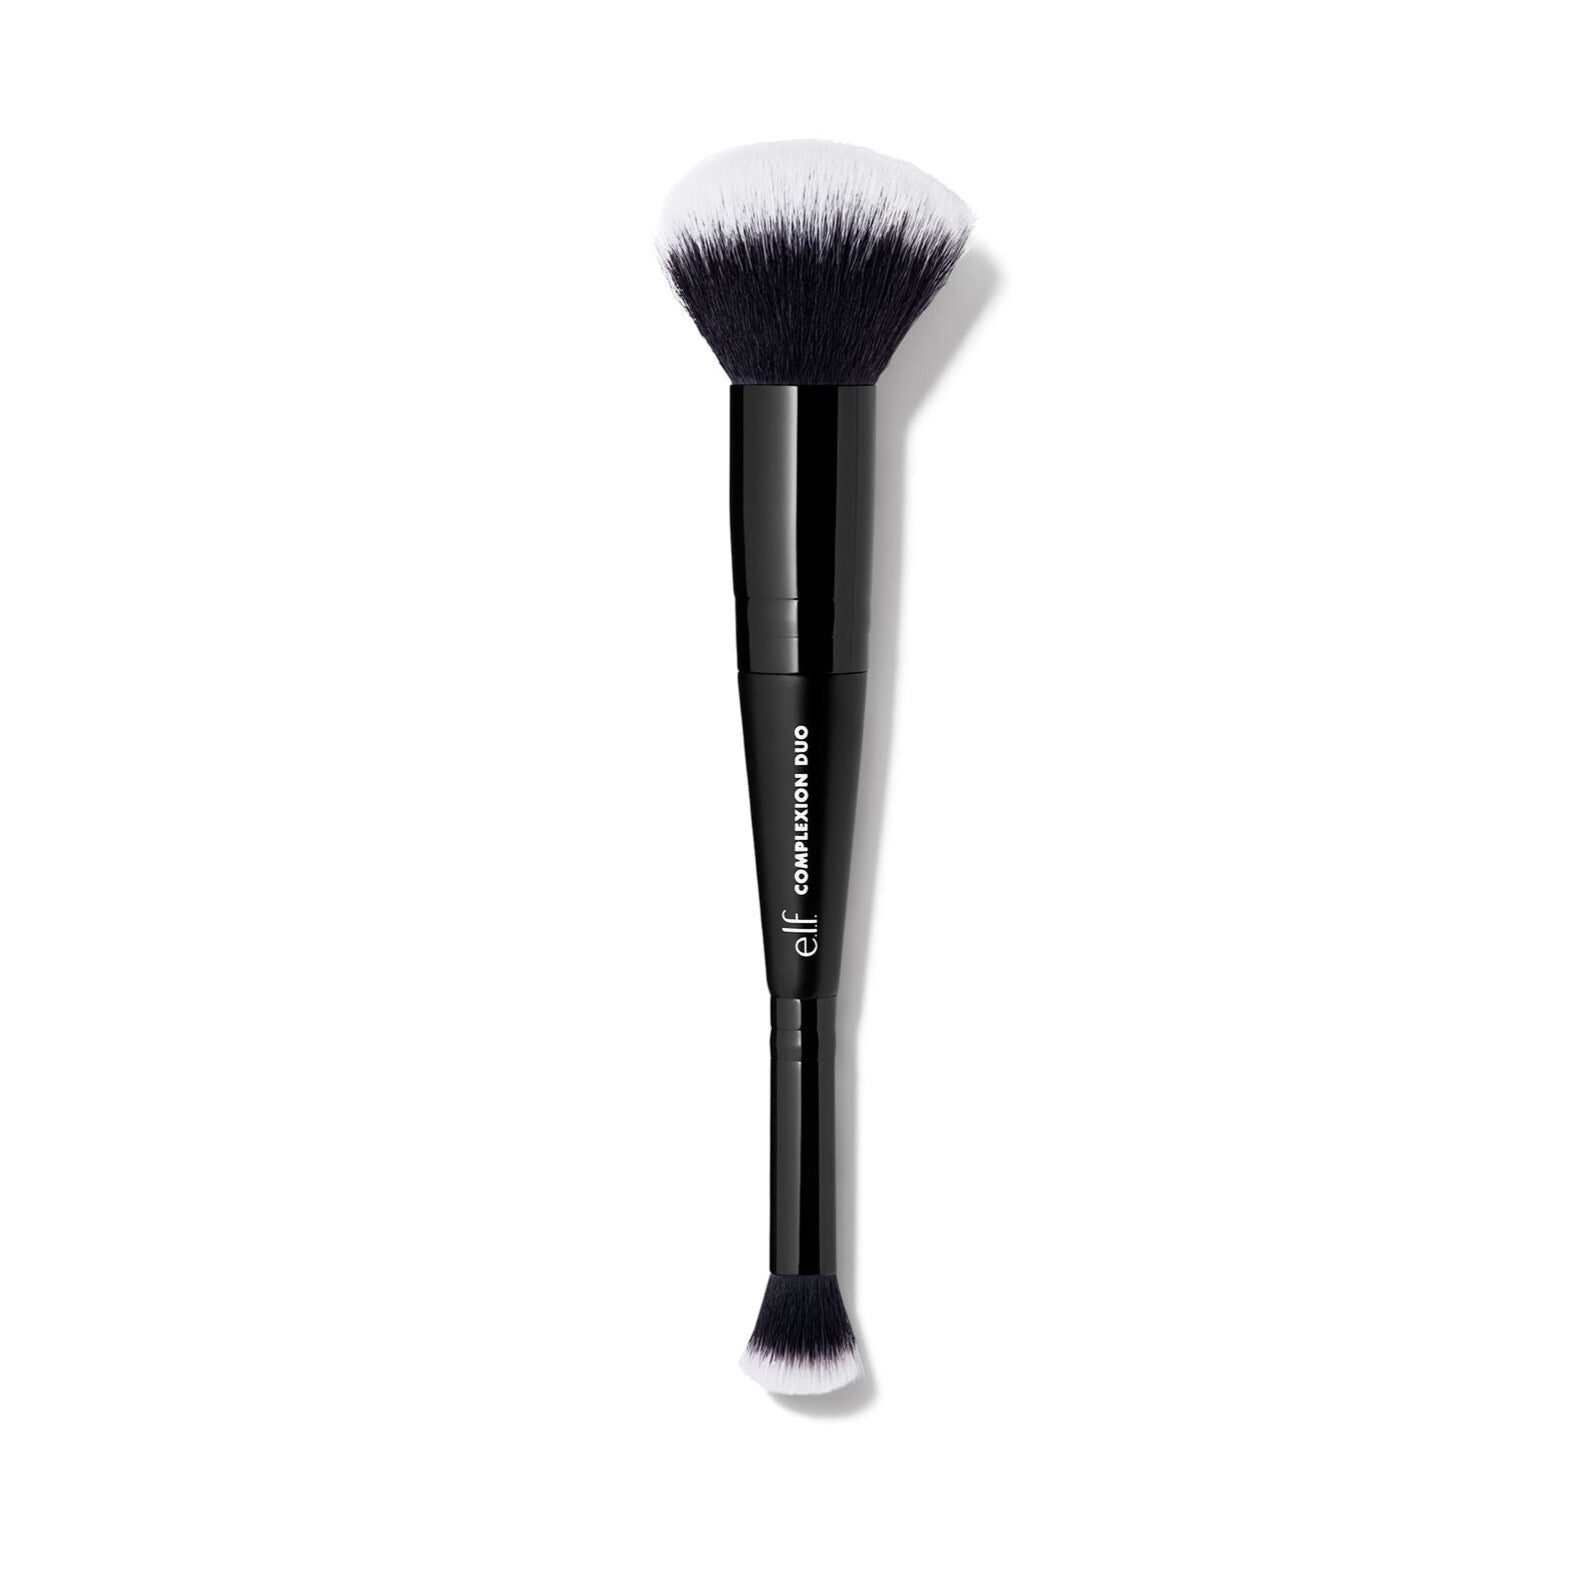 Concealer & Foundation Complexion Duo Brush